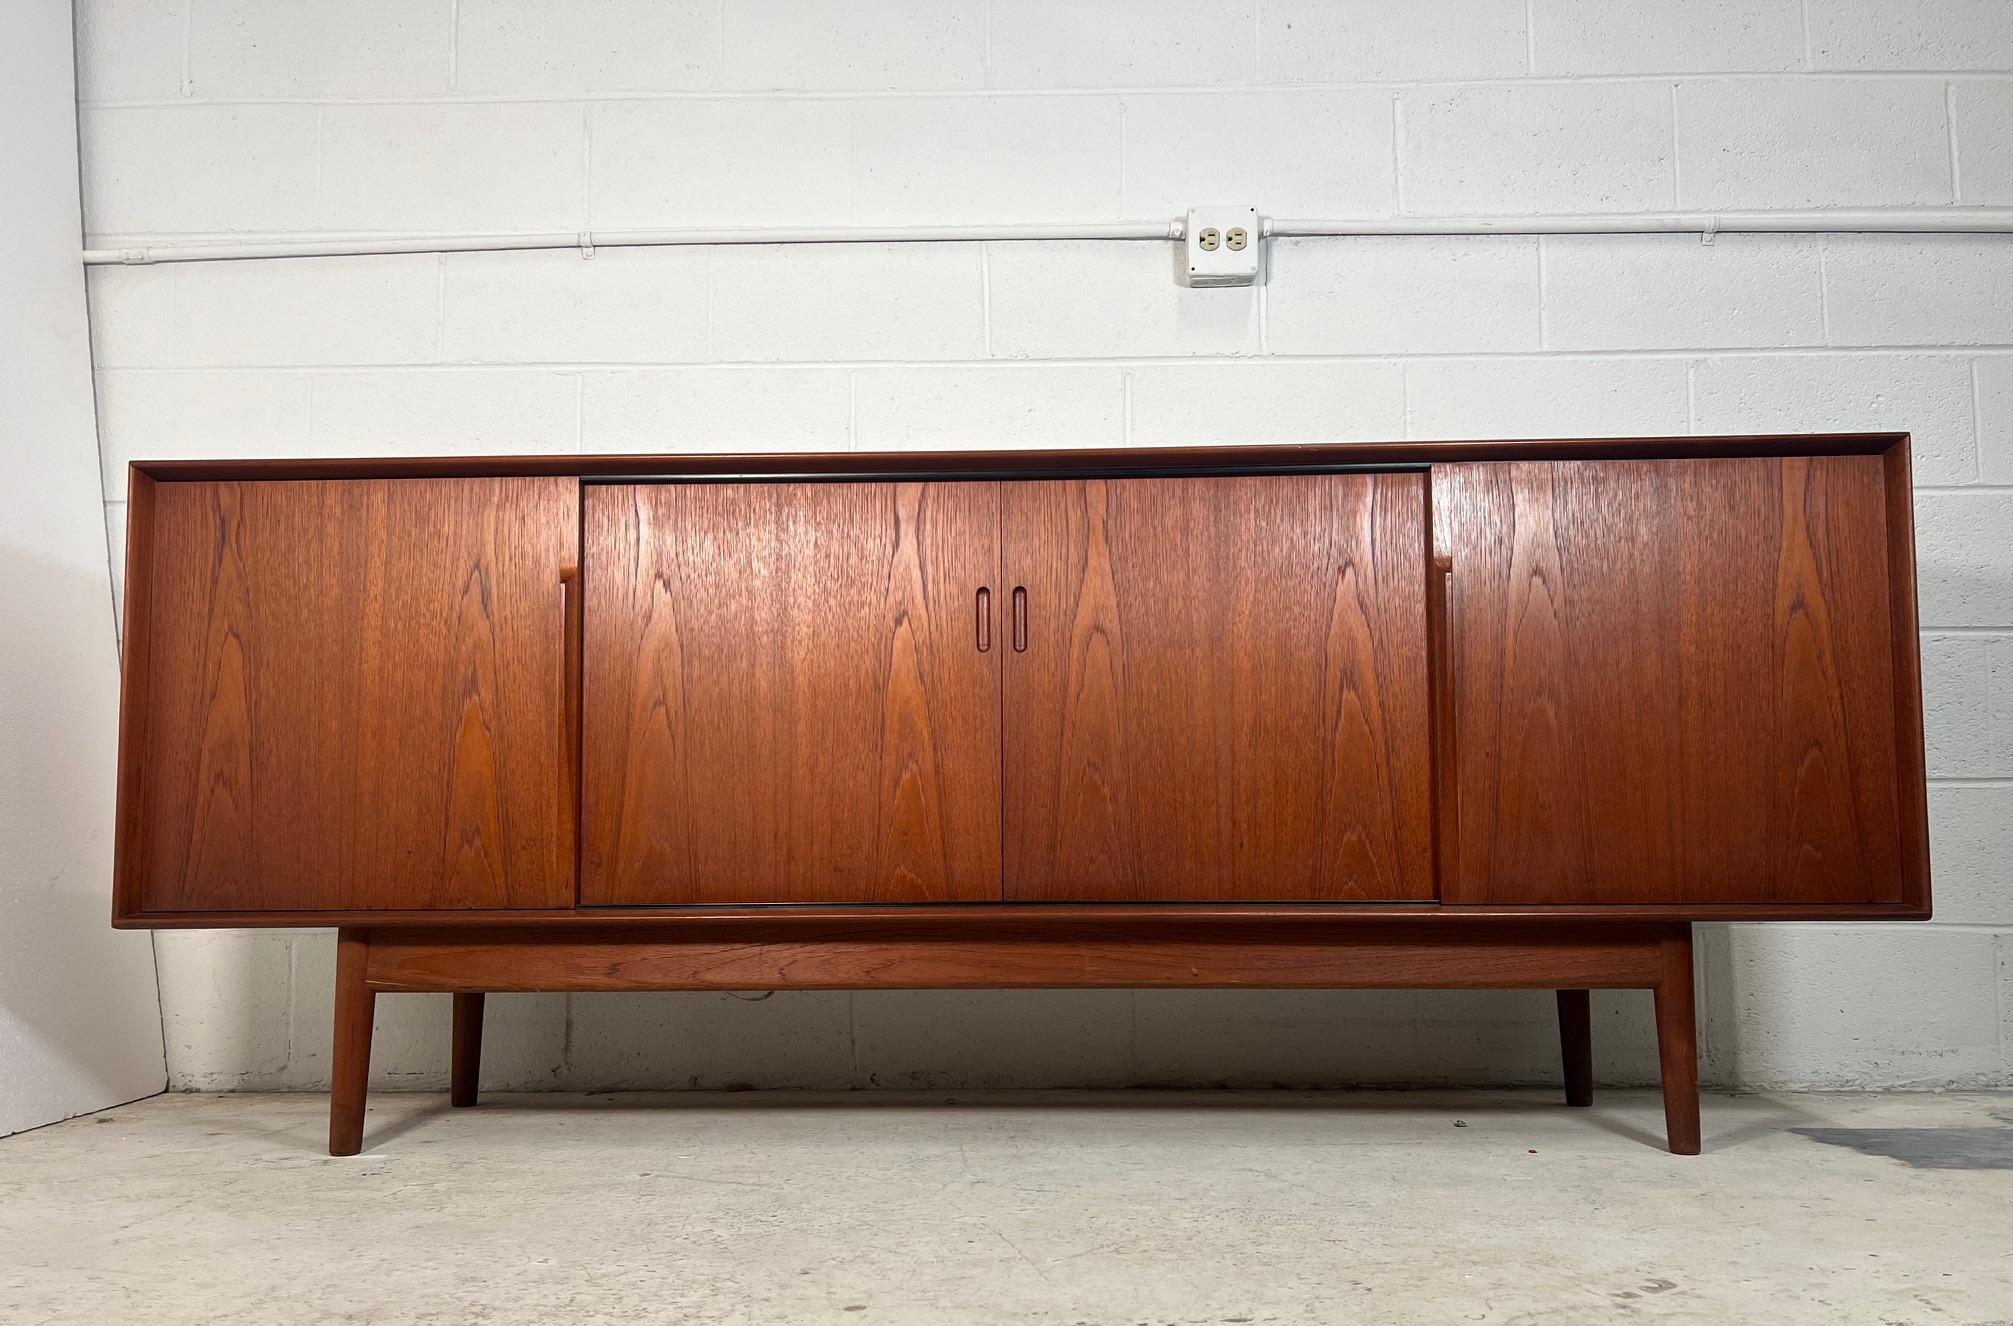 Outstanding teak credenza or buffet. Made in England by Dalescraft. Featuring two sets of sliding doors. Three drawers on the left side. Removable shelves in the middle. Shelf on the right is missing. Finished back. Minor signs of wear. Some marks